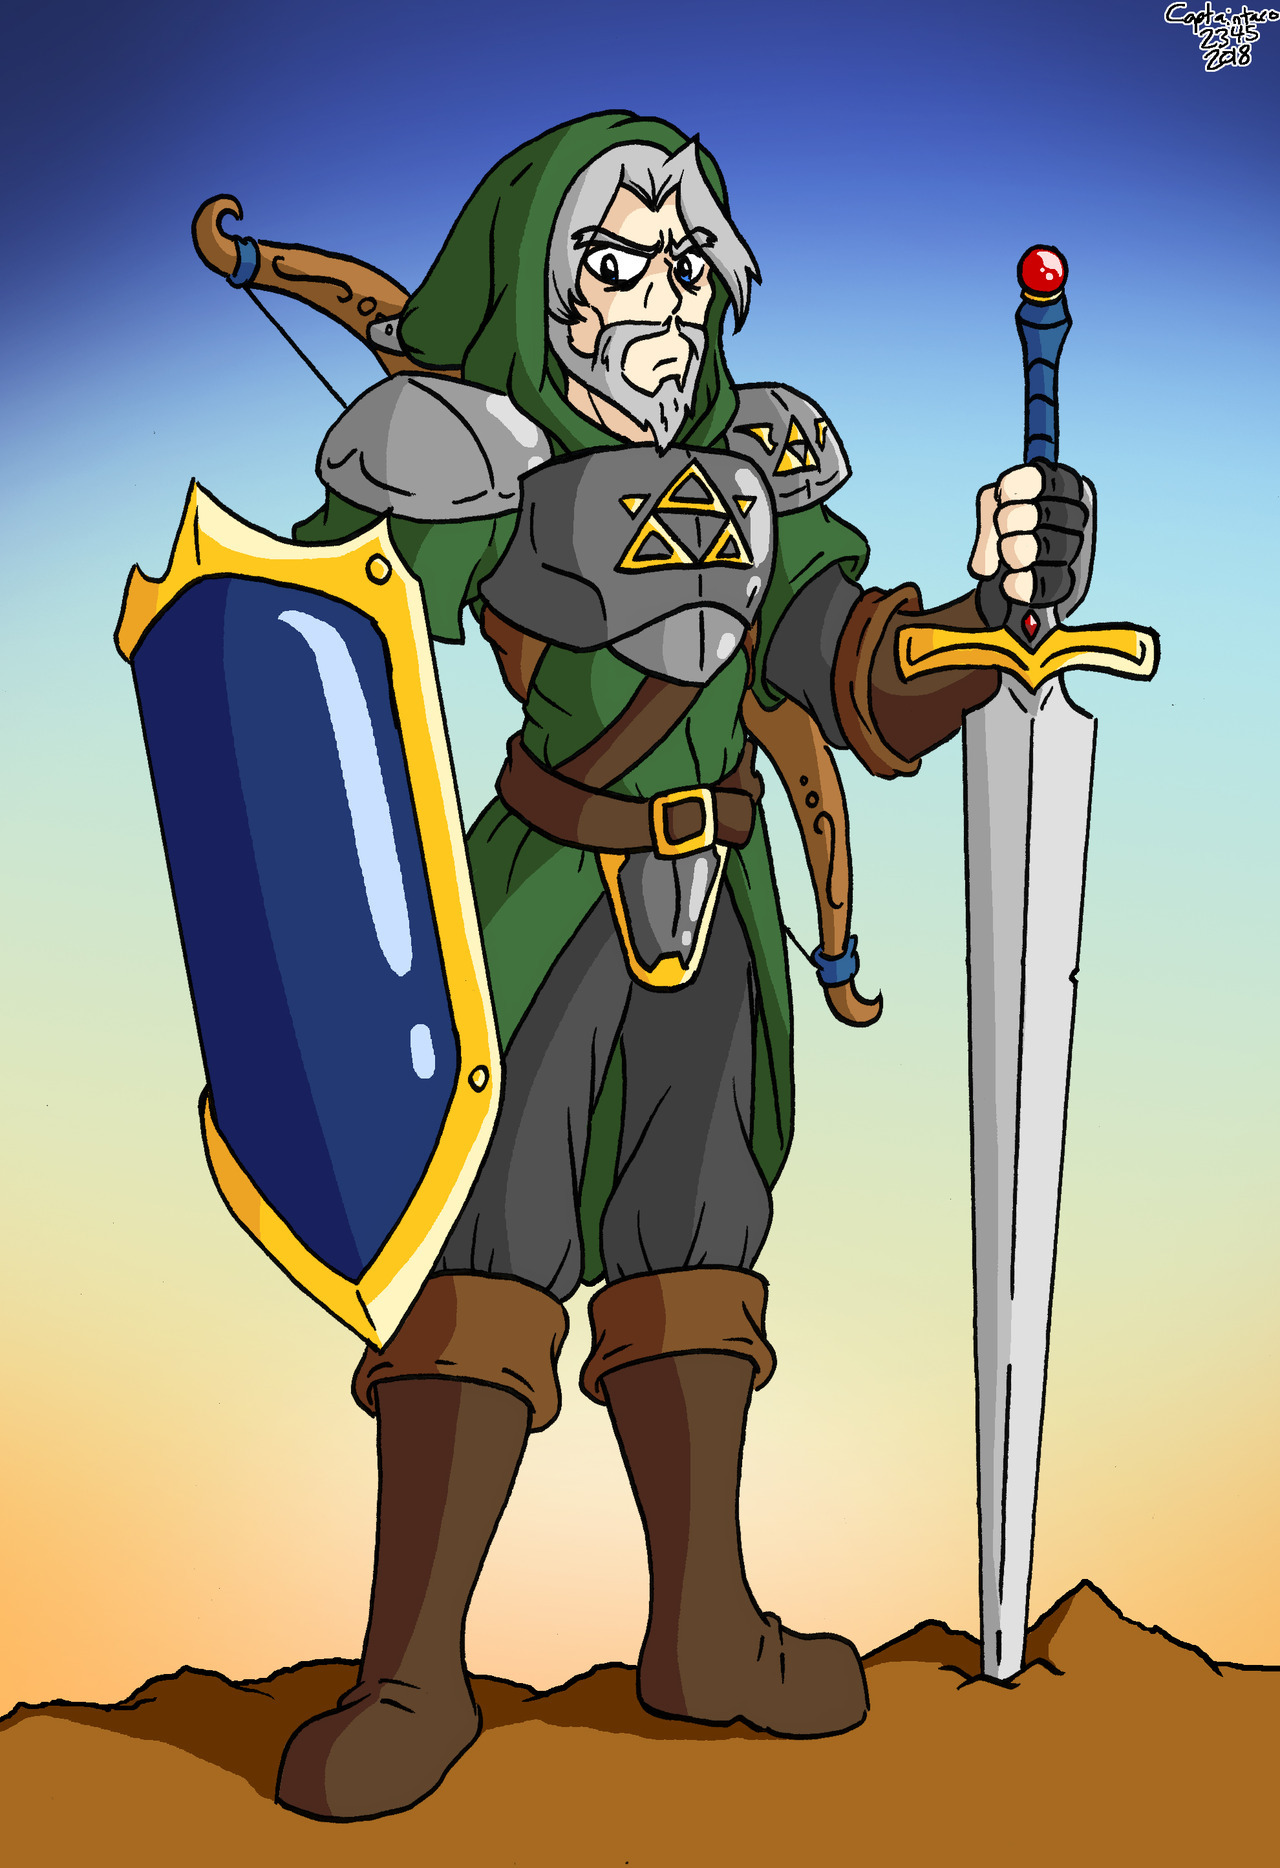 My design for an older version of Link from the Legend of Zelda. Partially inspired